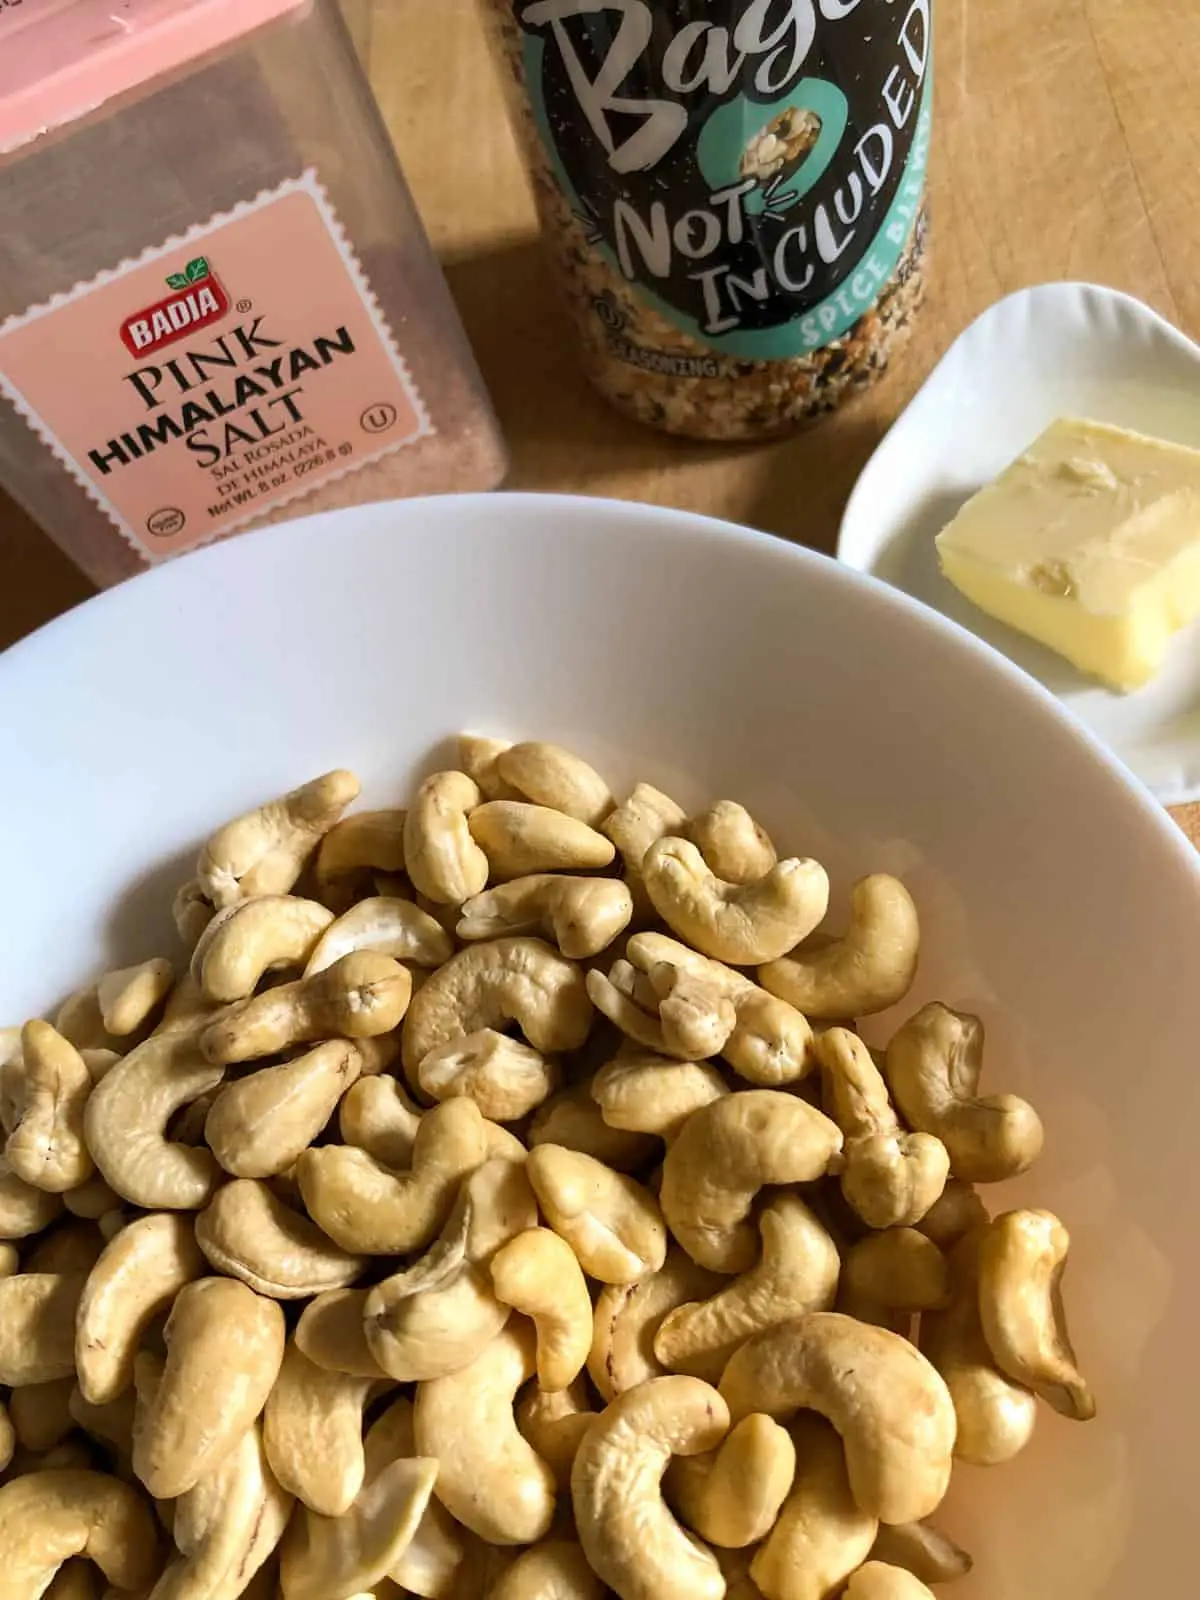 Cashews in a white bowl, container of Pink Himalayan Salt, bottle of Bagel not included seasoning, white dish with butter.